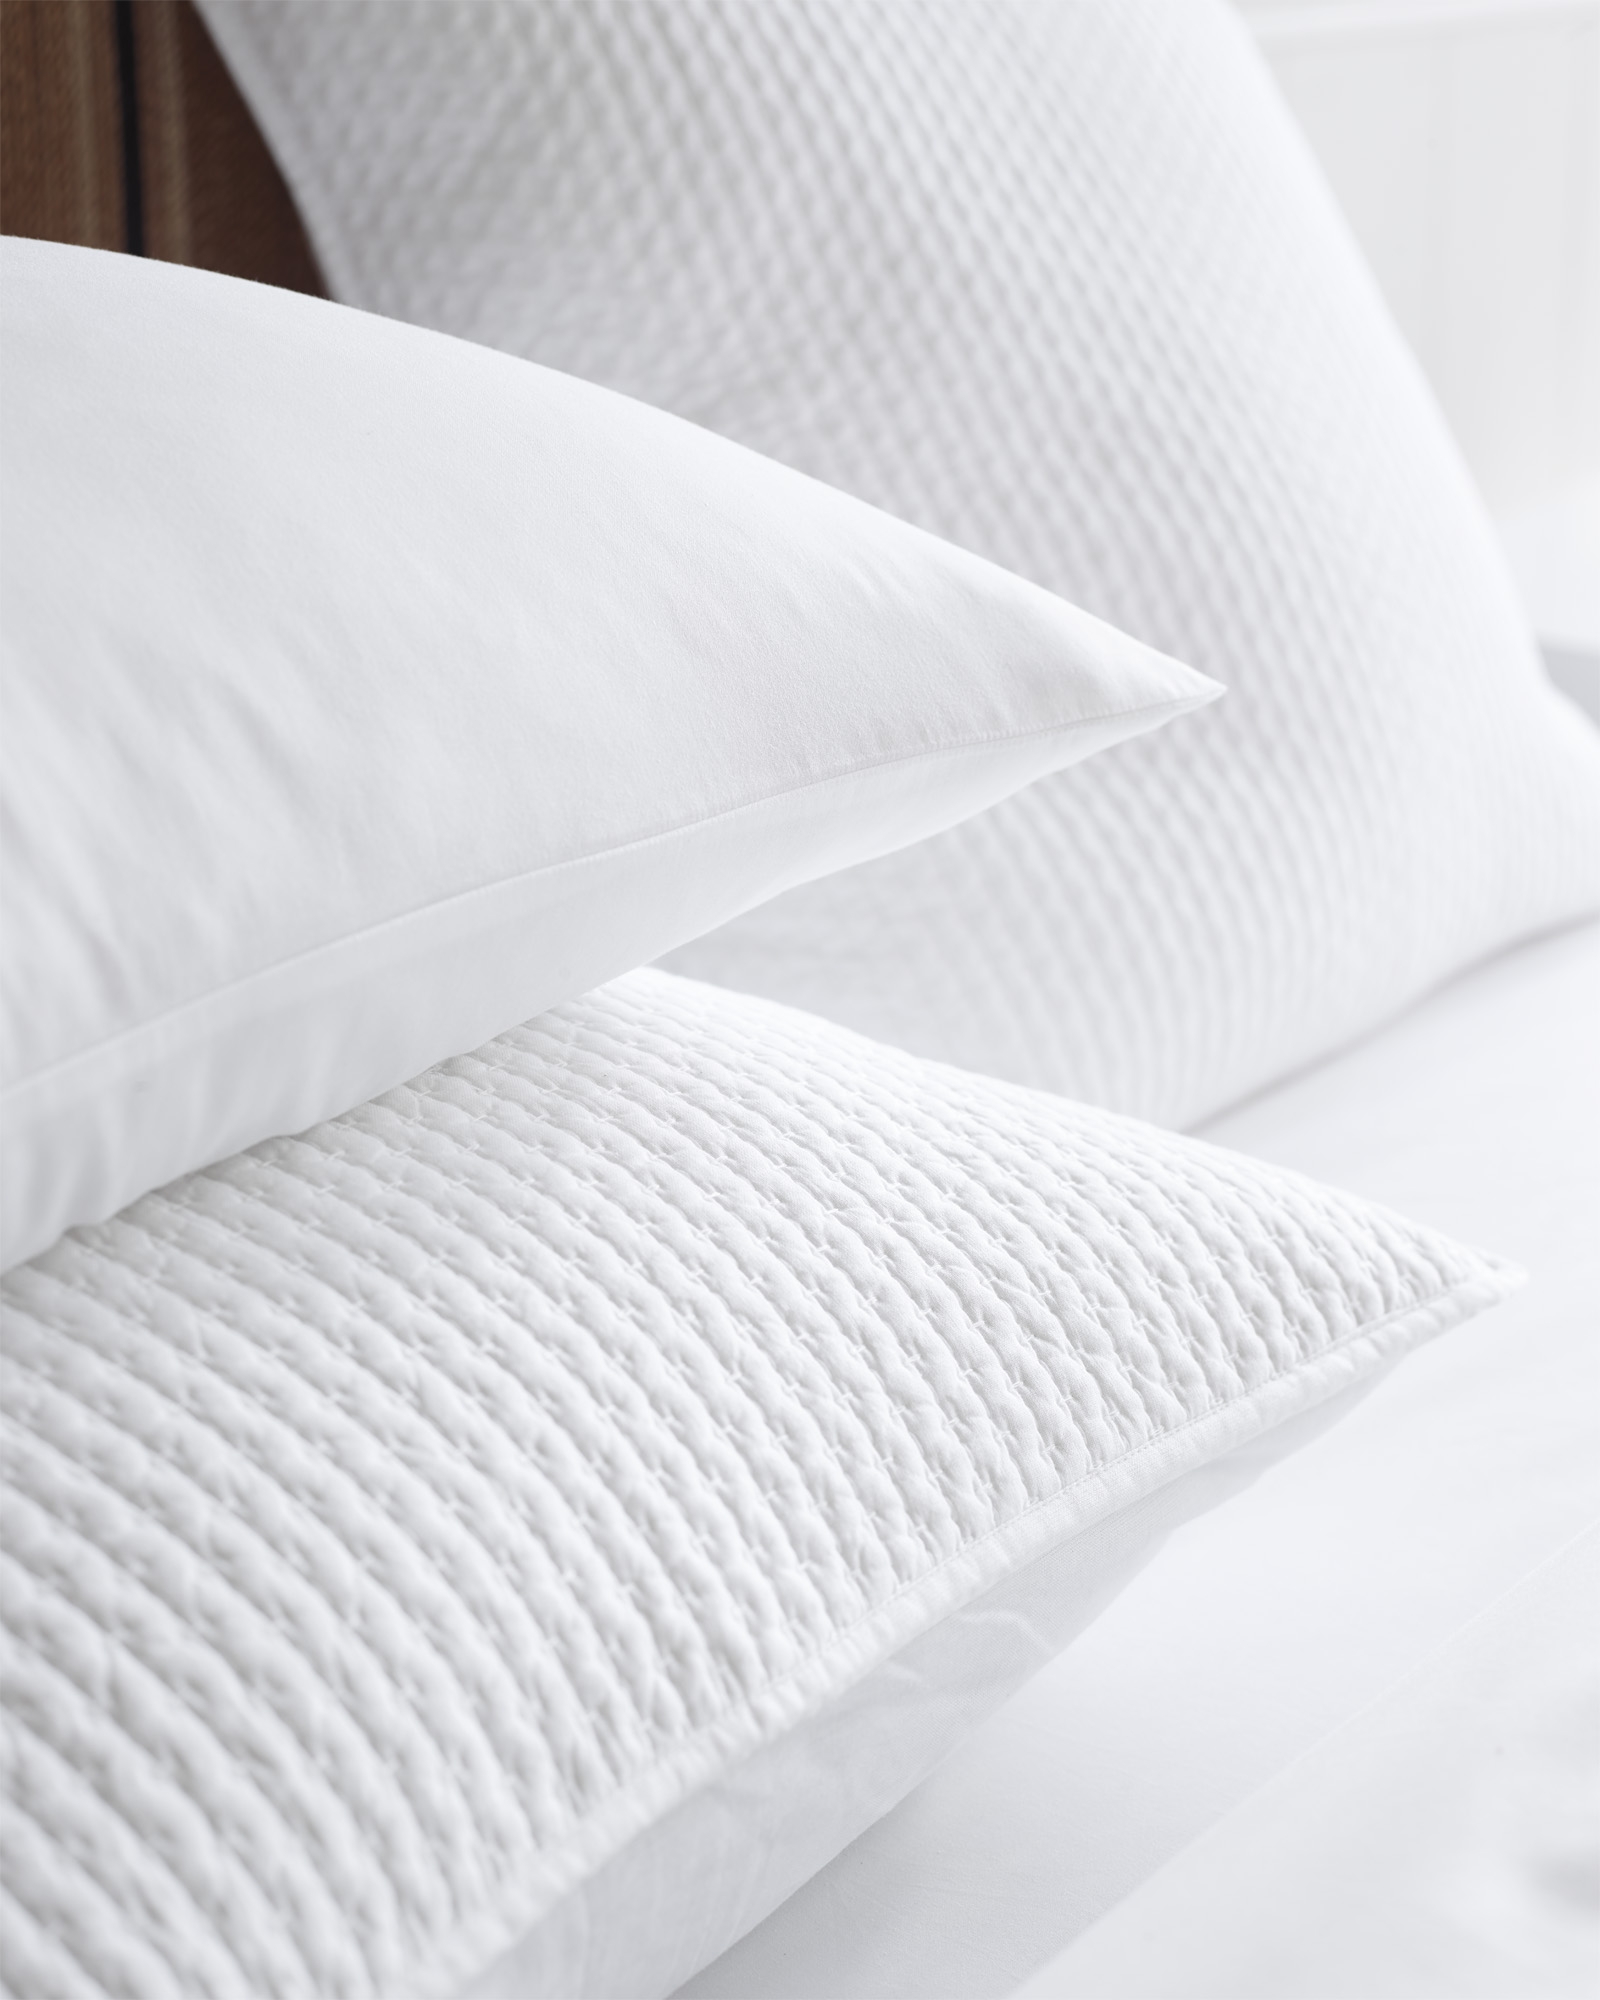 Westwood Quilted Euro Sham - White - Cotton Fill - Image 1